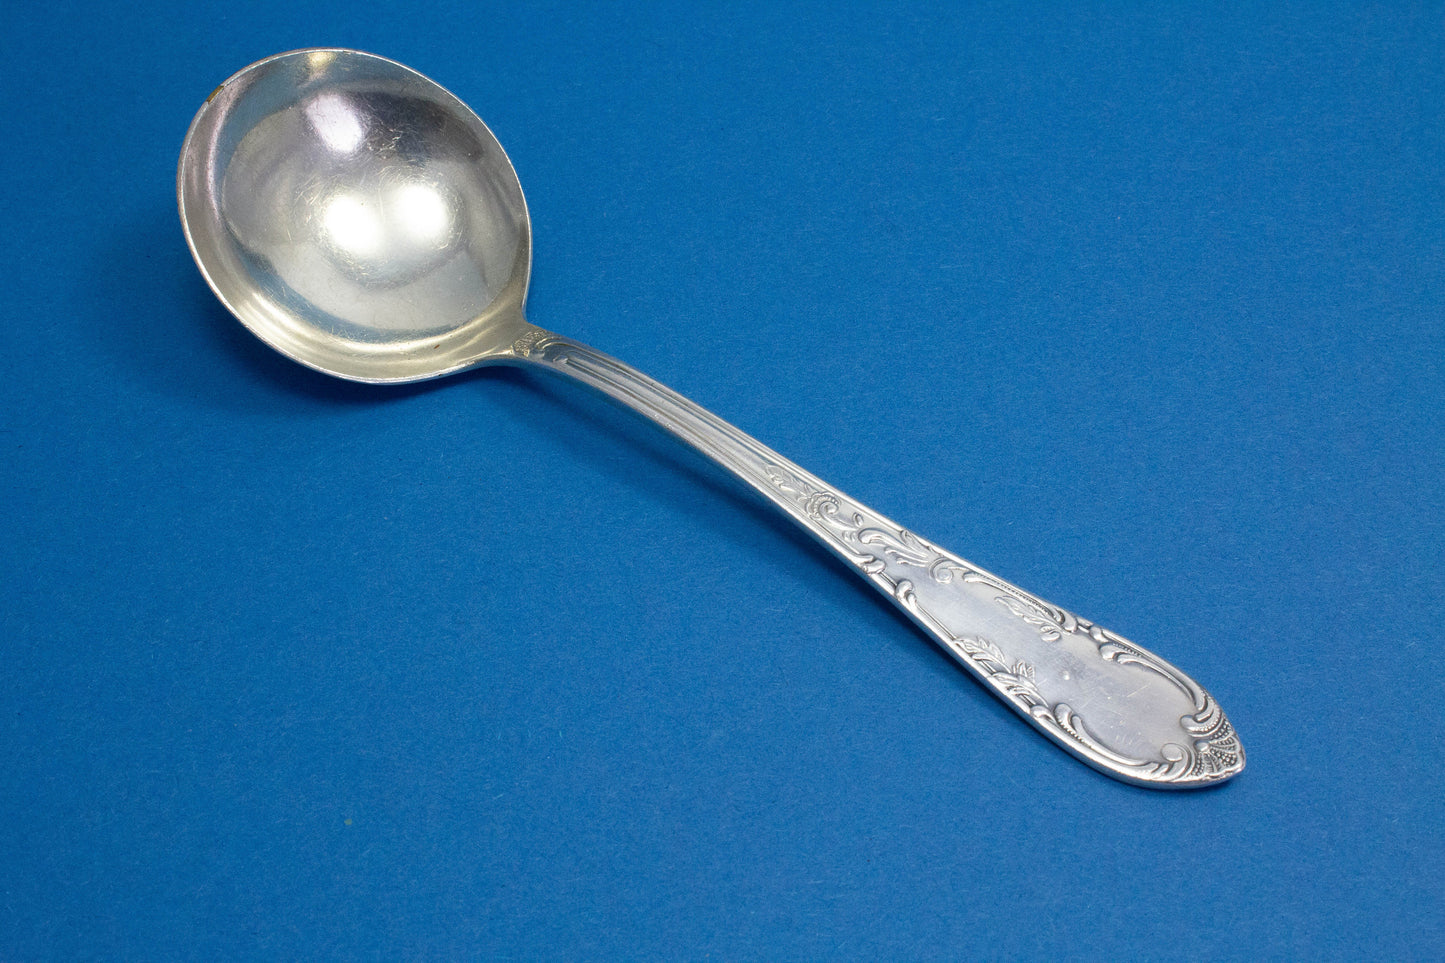 Silver-plated cream spoon with rococo decorations